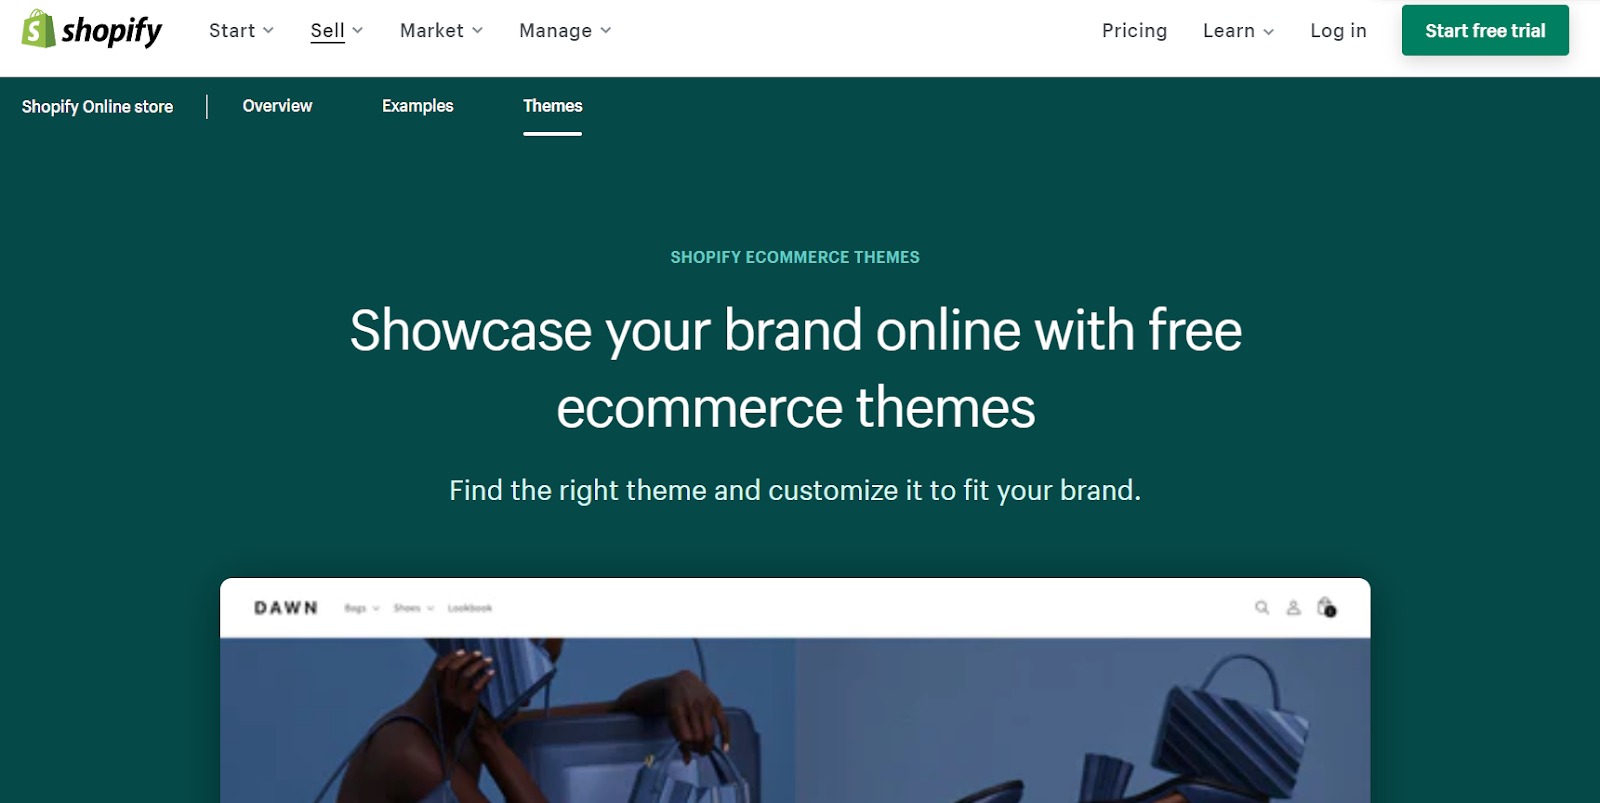 Shopify has tons of themes for you to choose from.